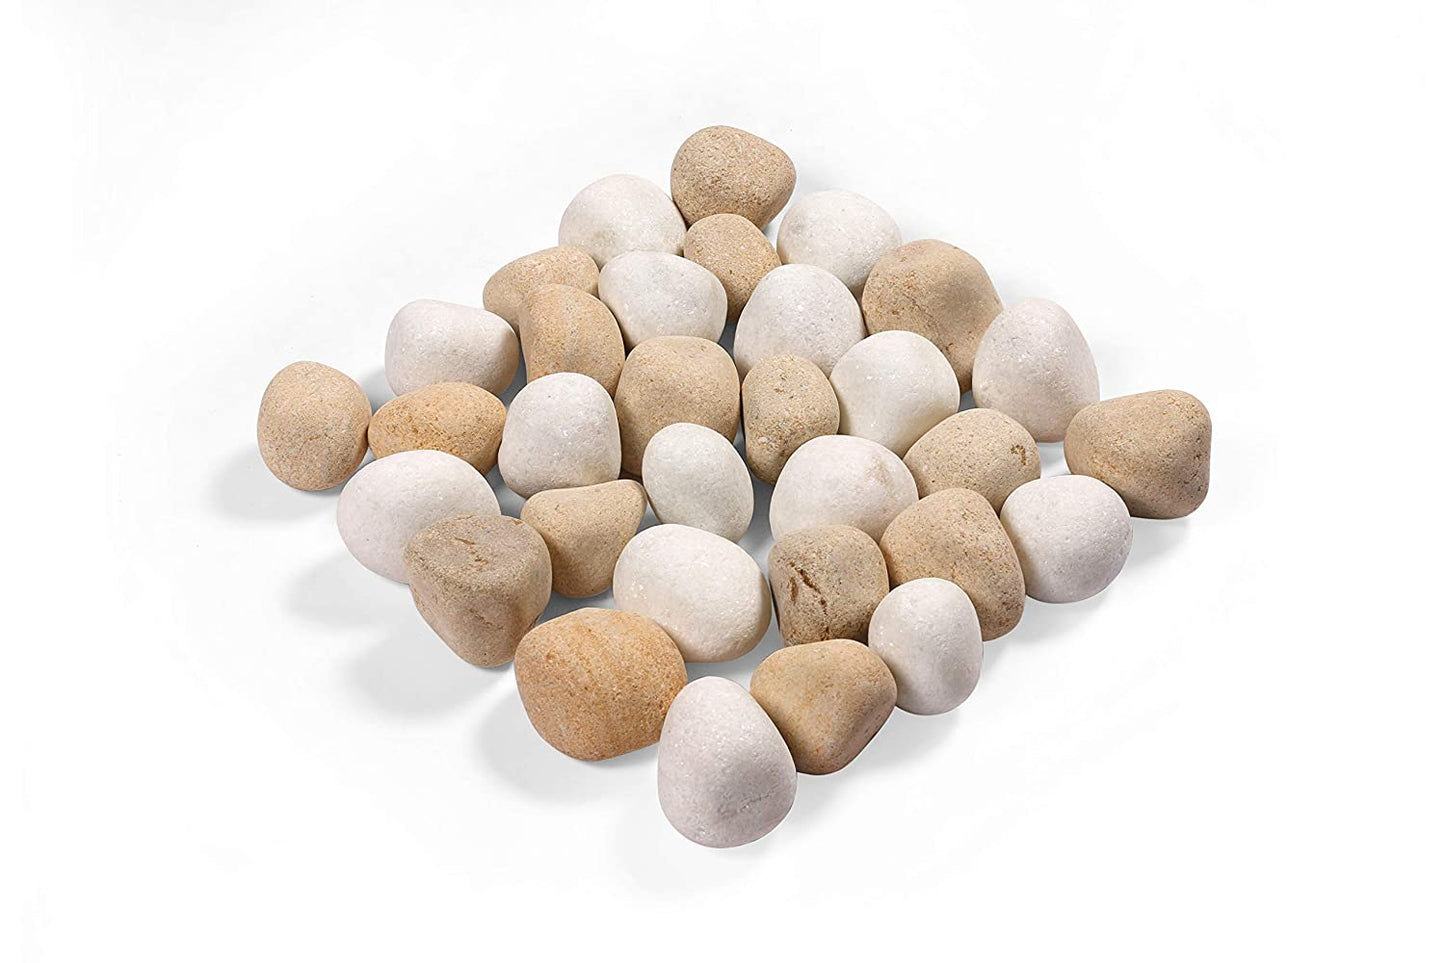 StoneStories Snow-white And Yellow Mixed Stones (1 Kg, 2-3 Inches)